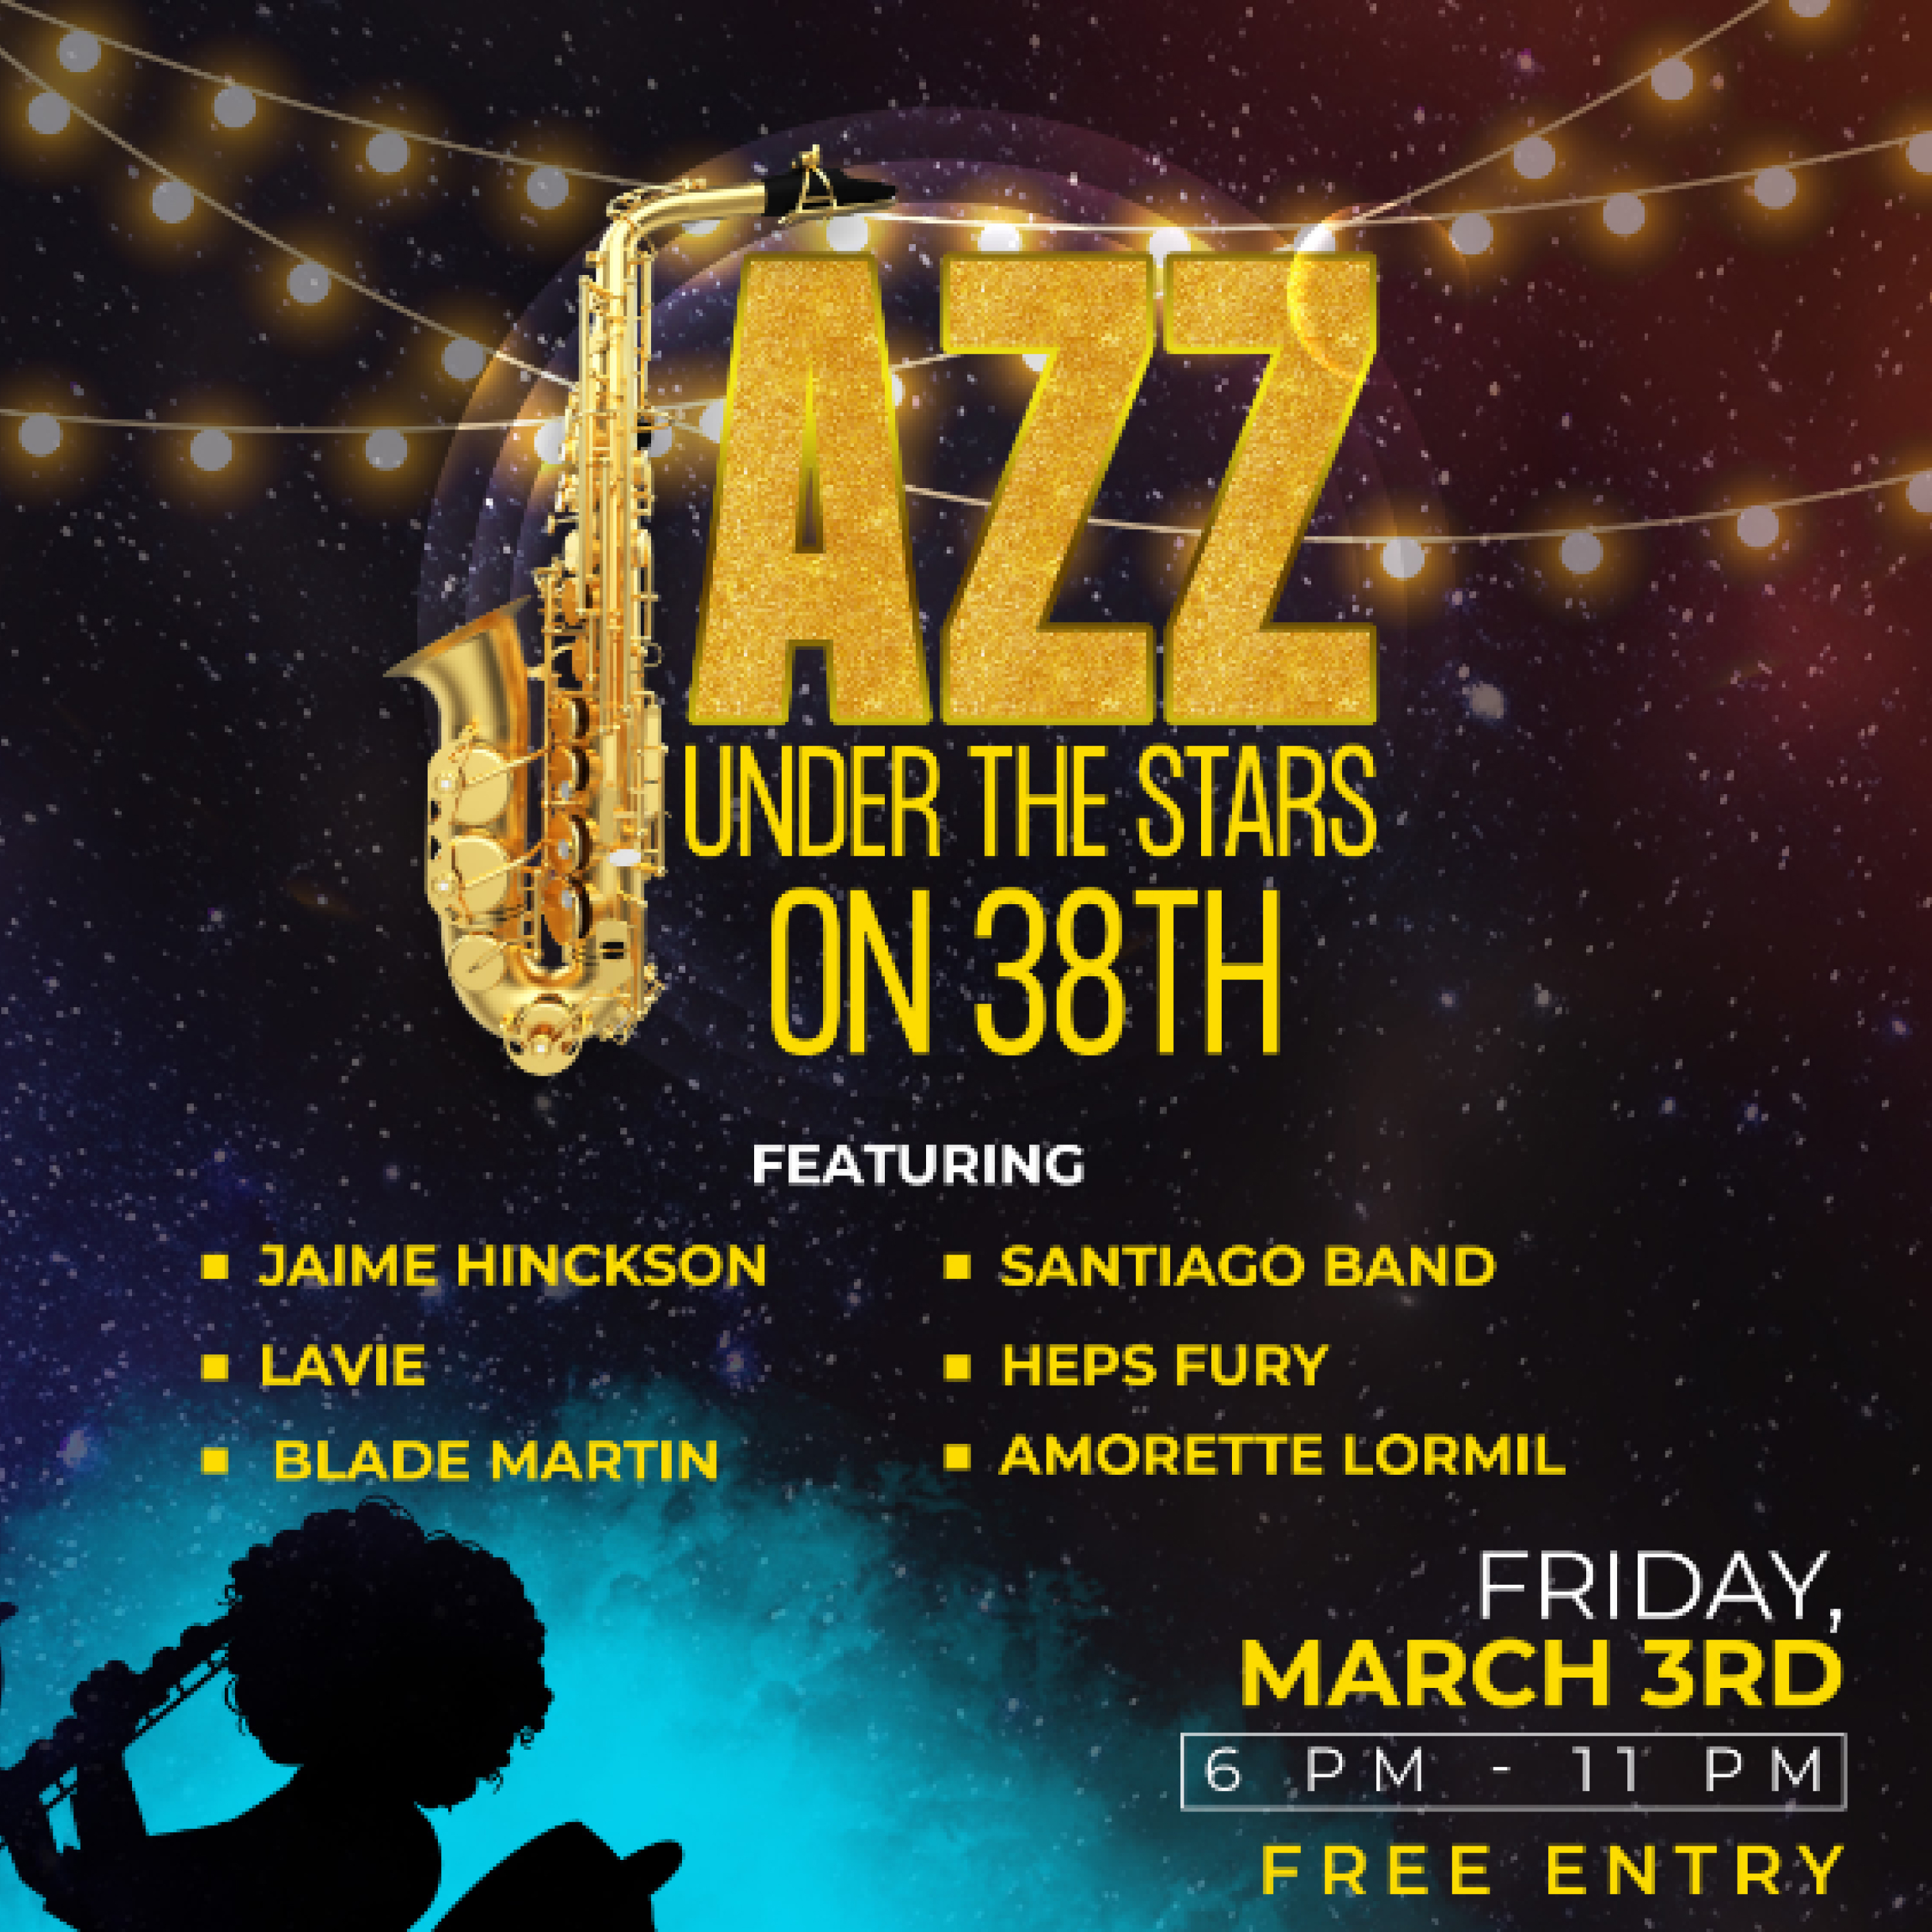 Jazz under the stars on 38th - Friday March 3rd, 6pm - 11pm